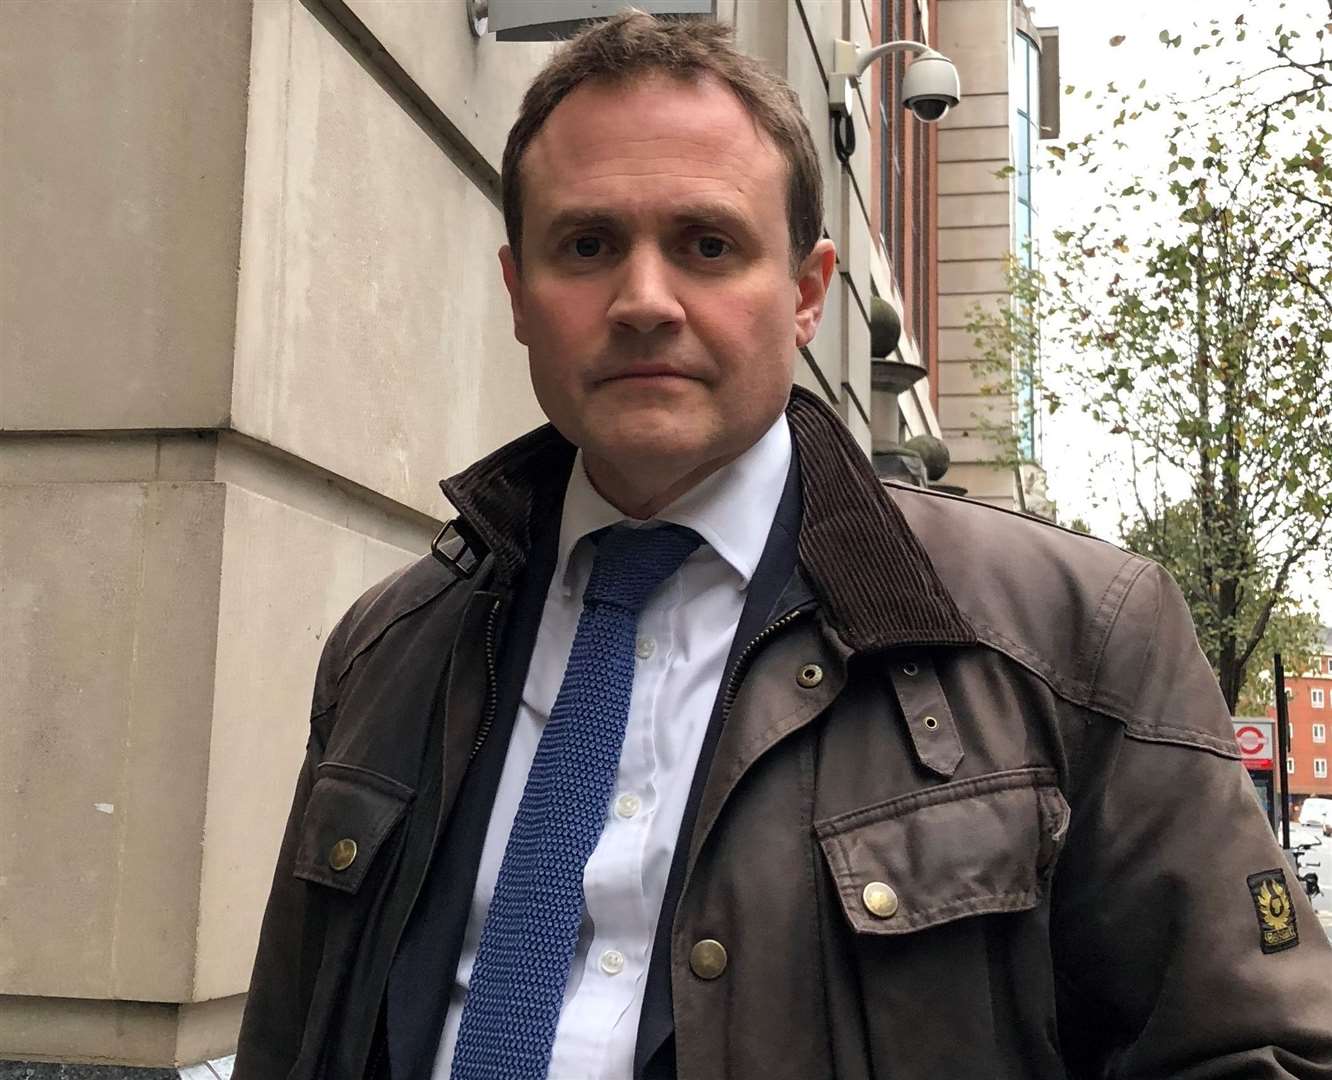 Will Tonbridge and Malling MP Tom Tugendhat keep his role as security minister?